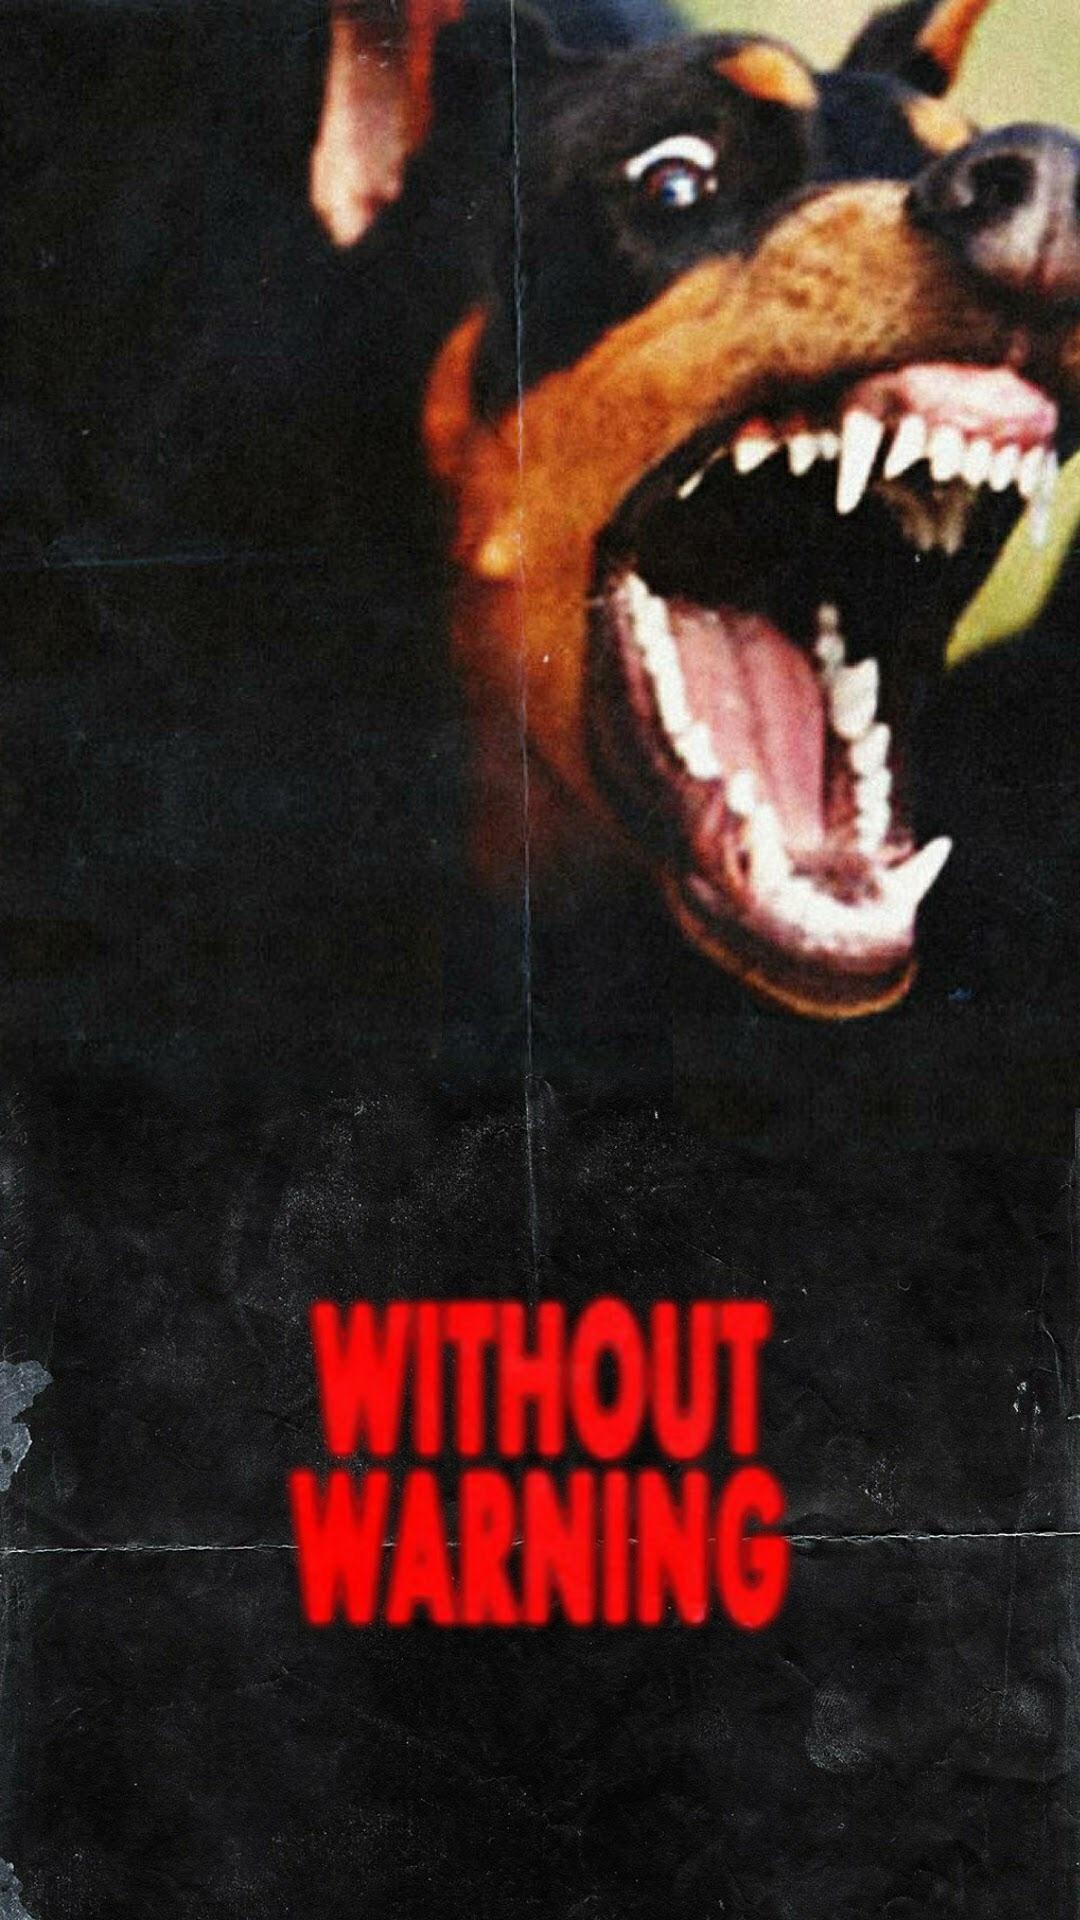 Without Warning Wallpaper For Phone R Hiphopwallpaper